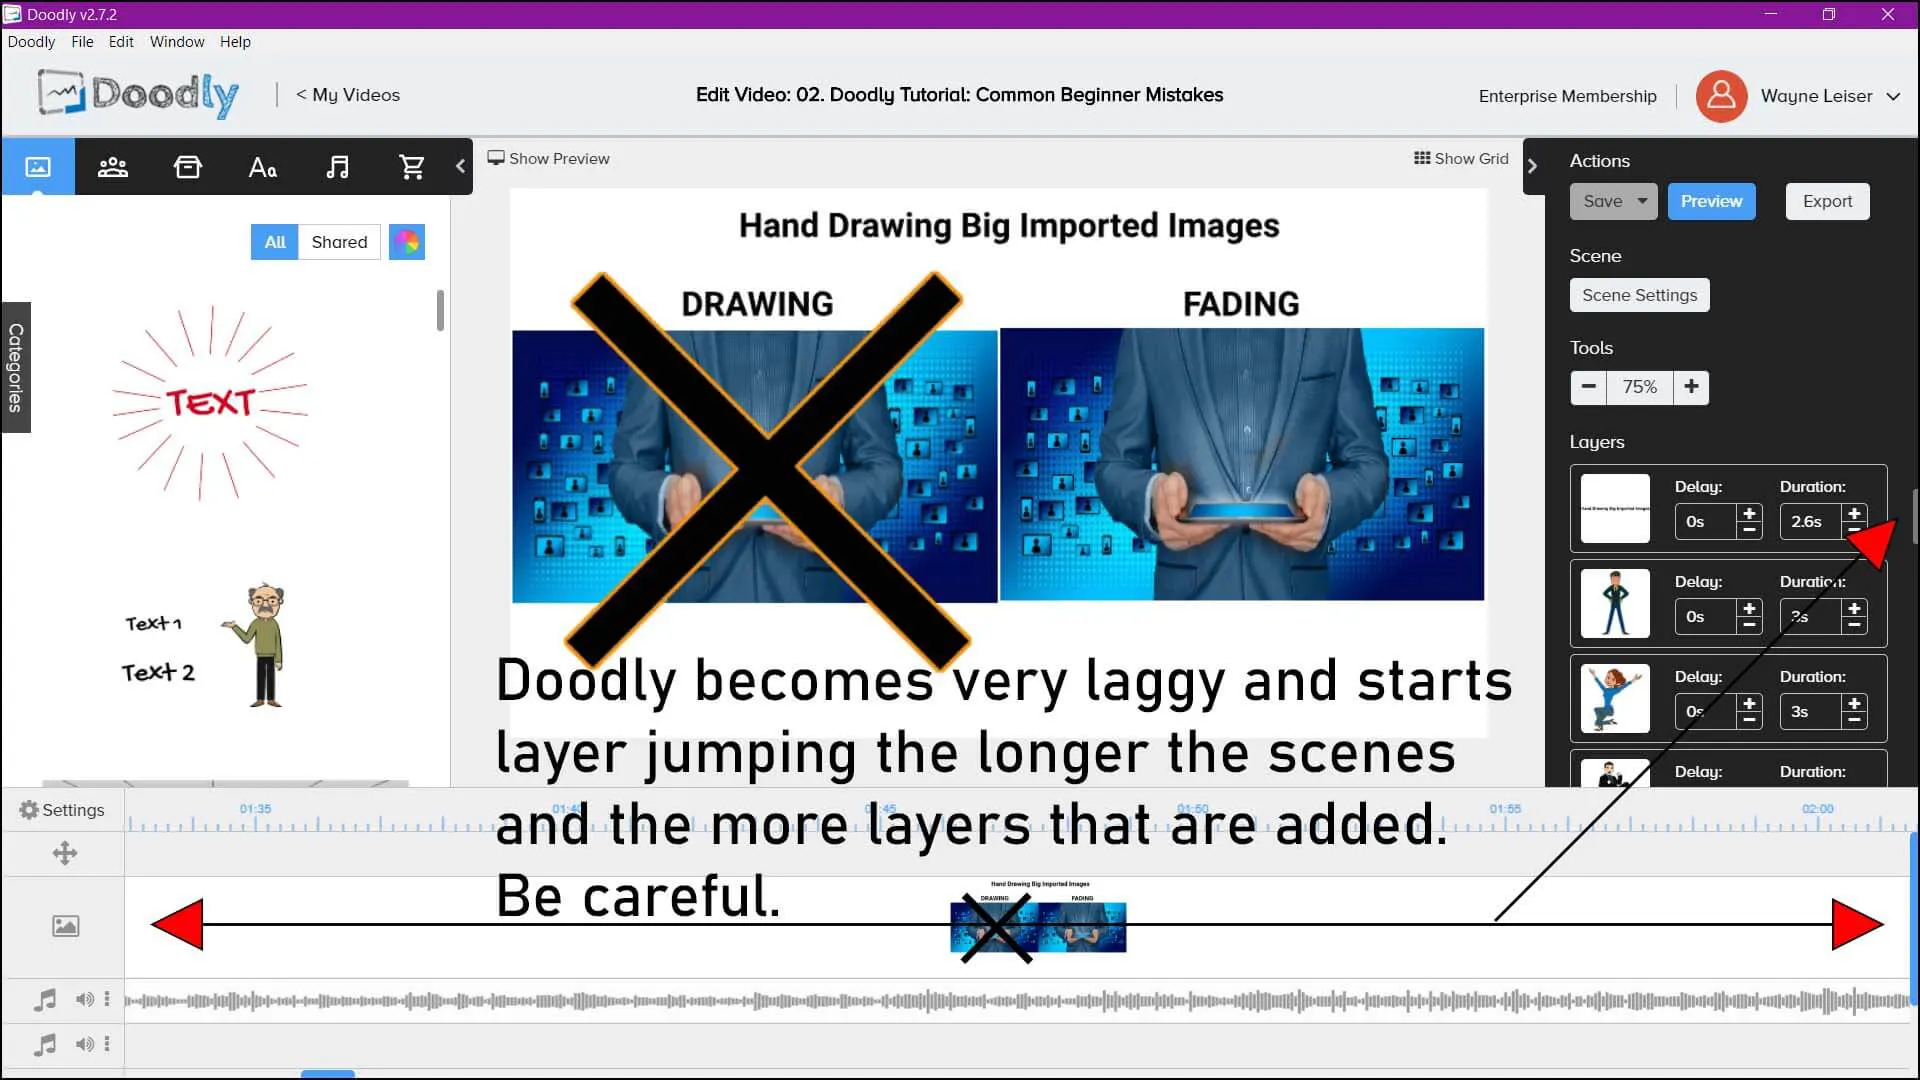 Shows an image example and explains why having too many scenes or too many layers in a Doodly video production is bad and will cause layer lumping and scene jumping.